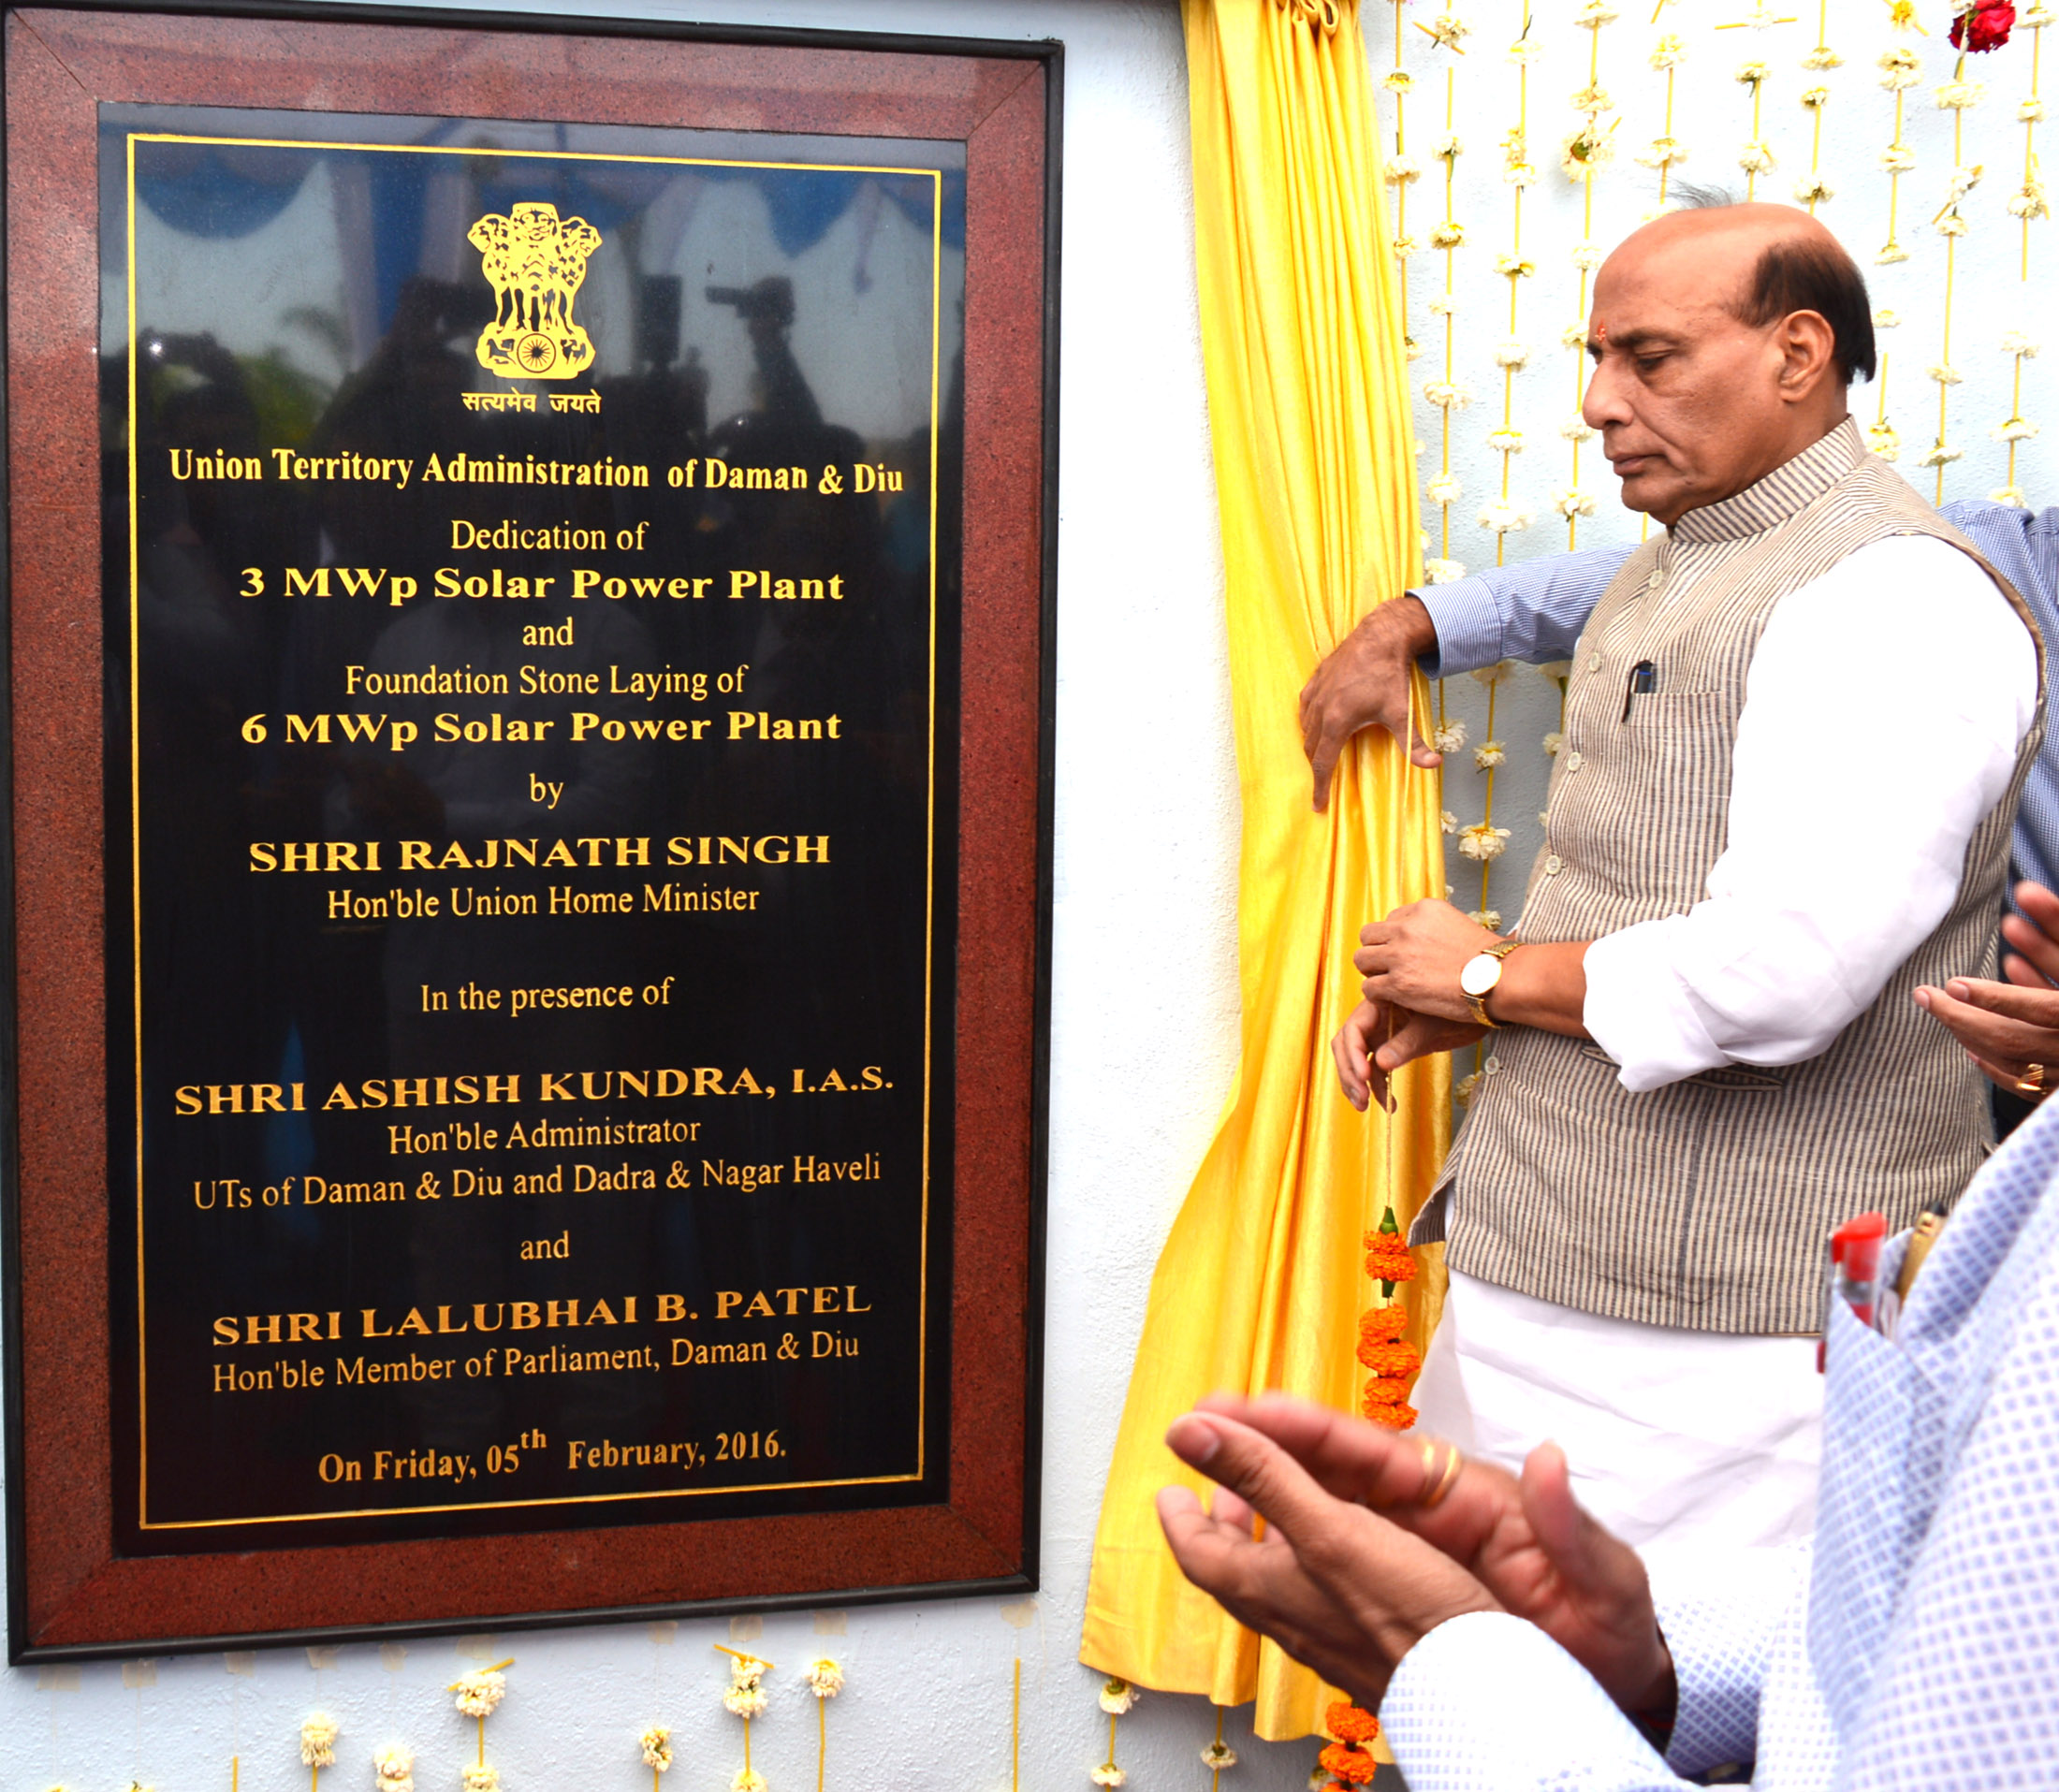 The Union Home Minister, Shri Rajnath Singh dedicating a 3 MW solar power plant and laying the foundation stone of a 6 MW plant, in Diu on February 01, 2016.